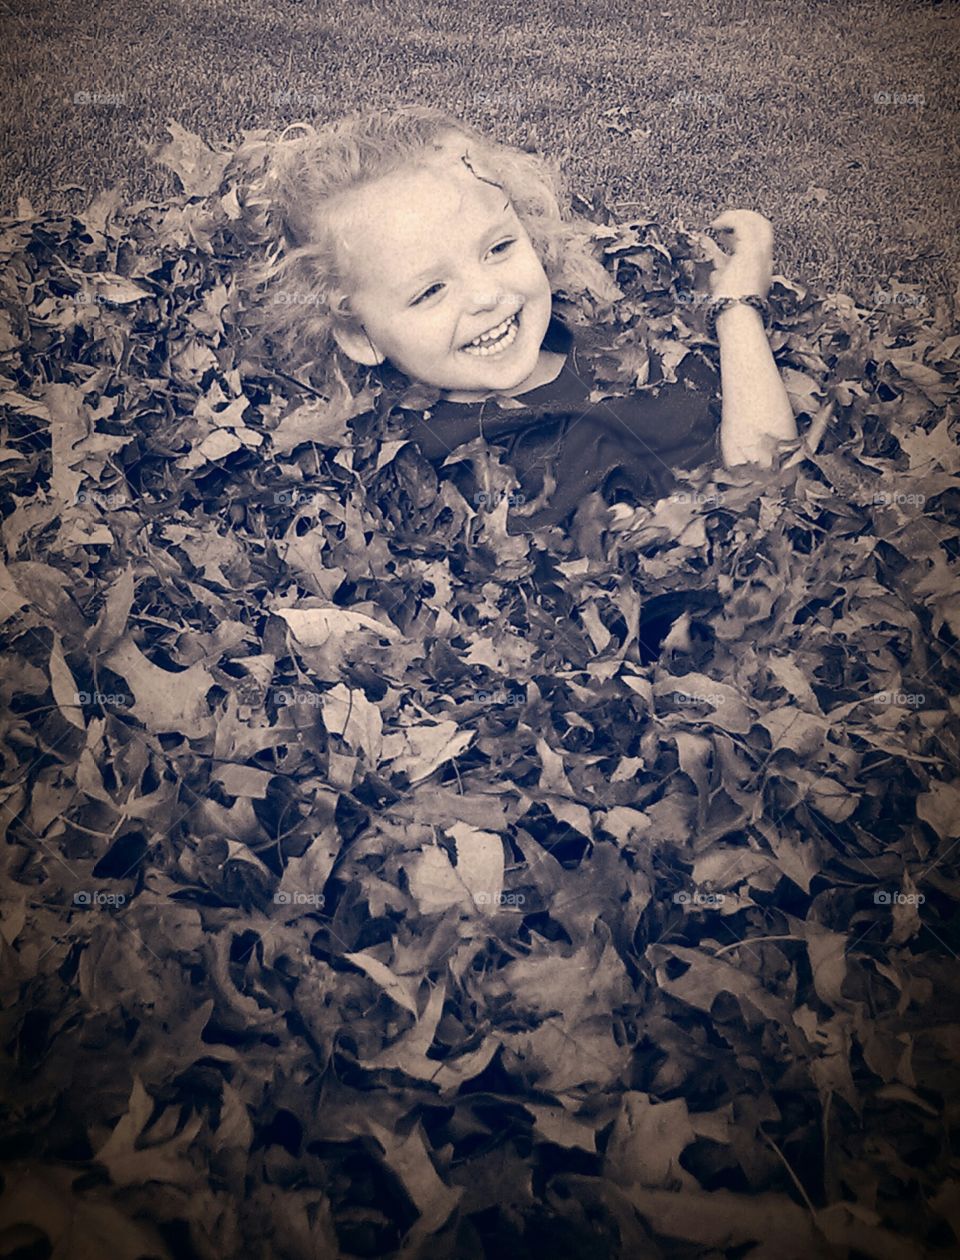 Jumping in the Leaves